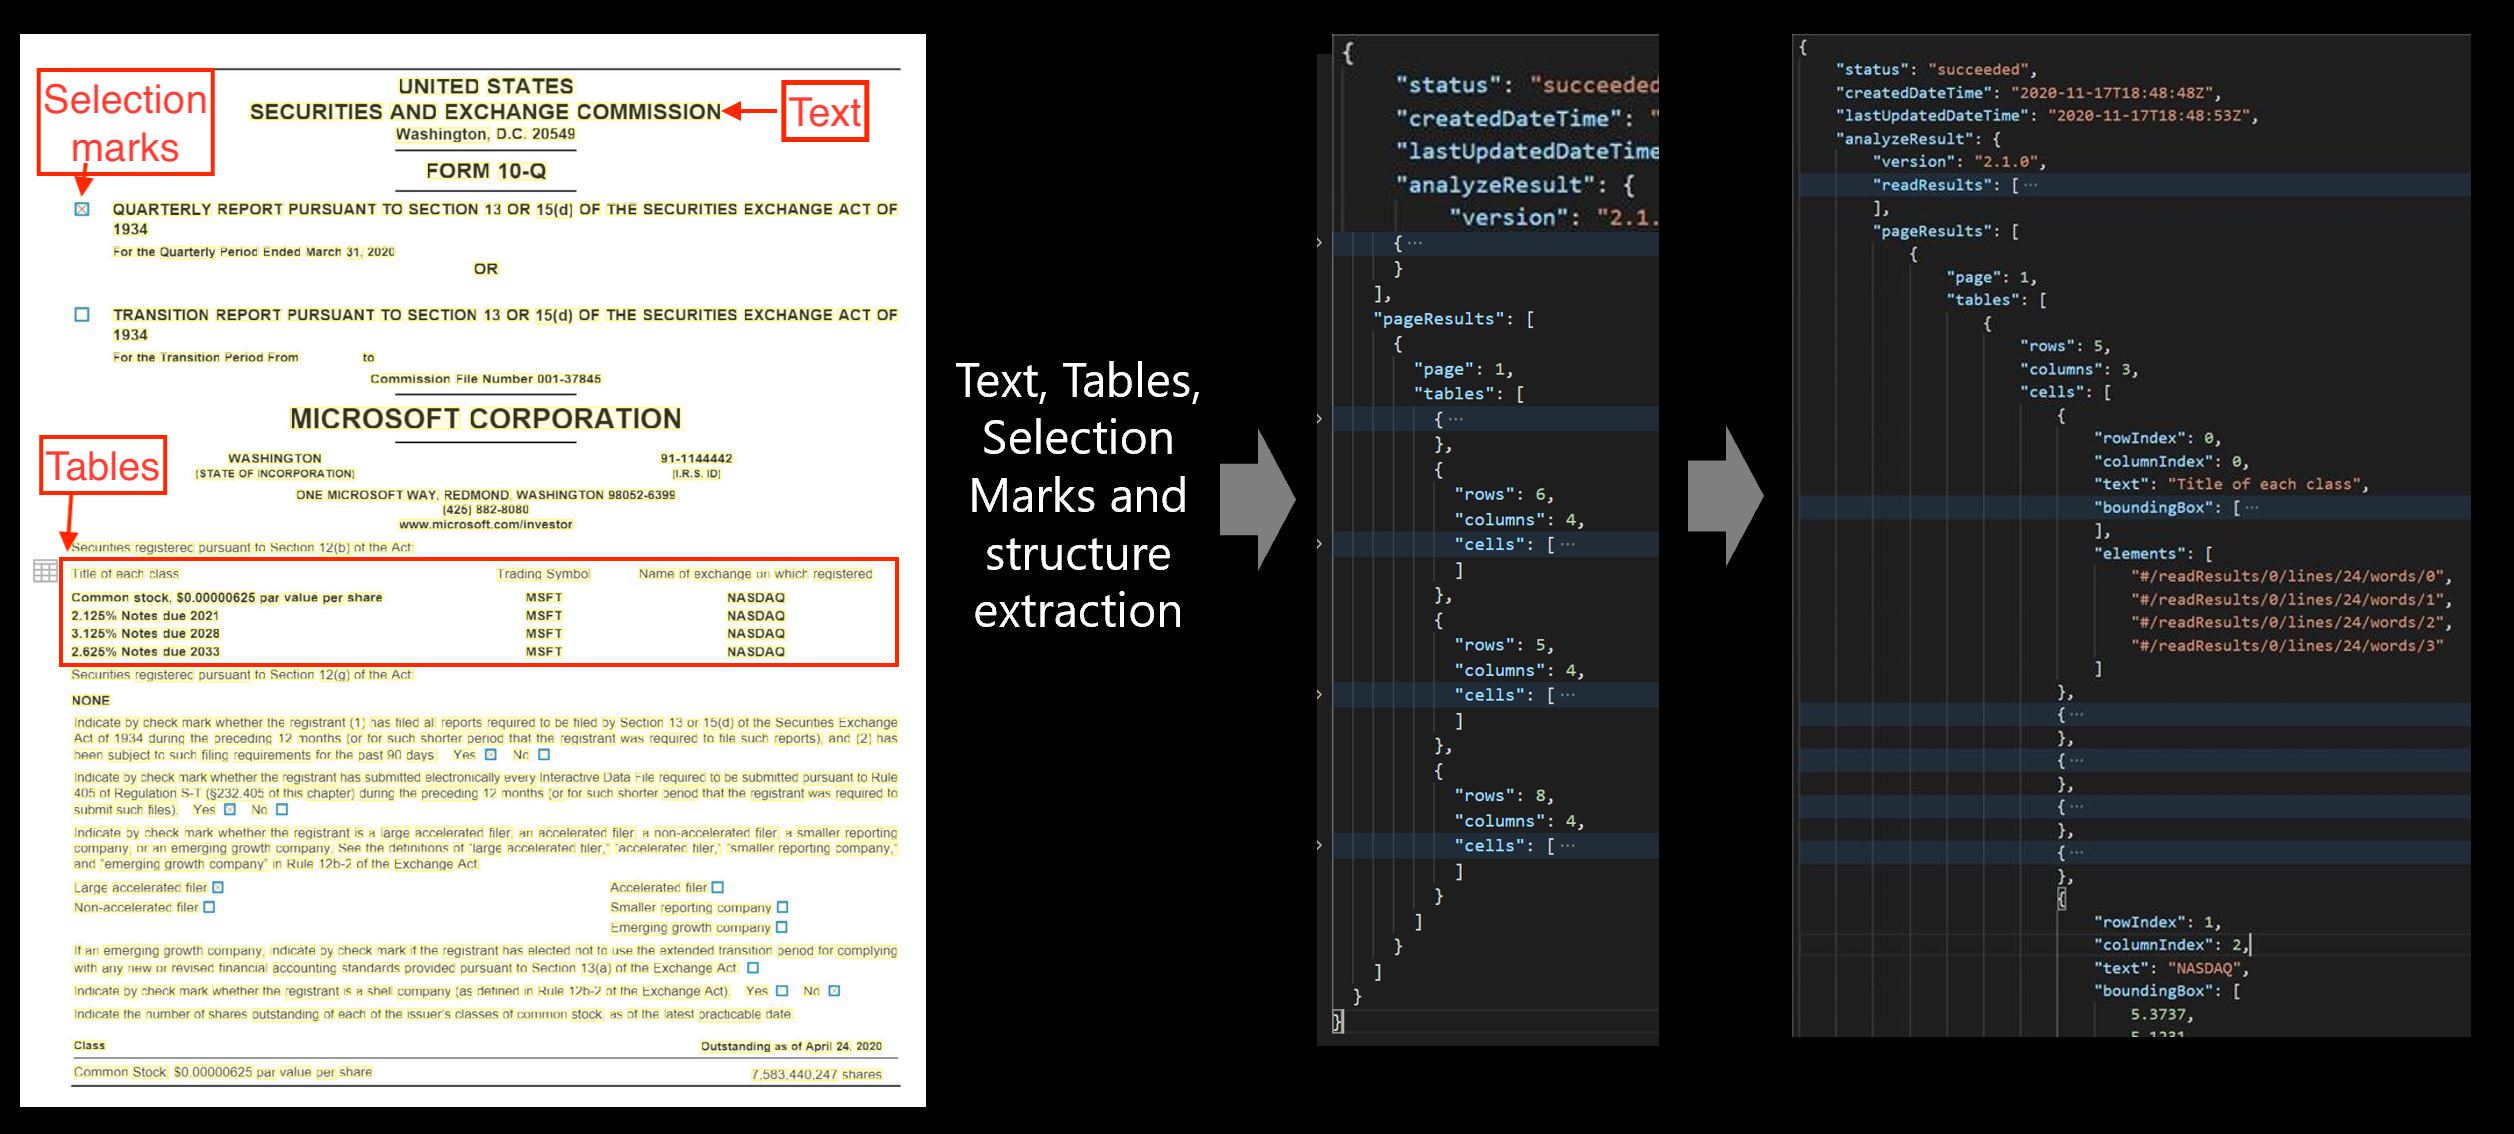 Example of Layout API with selection marks, text, and tables identified and represented in JSON format.